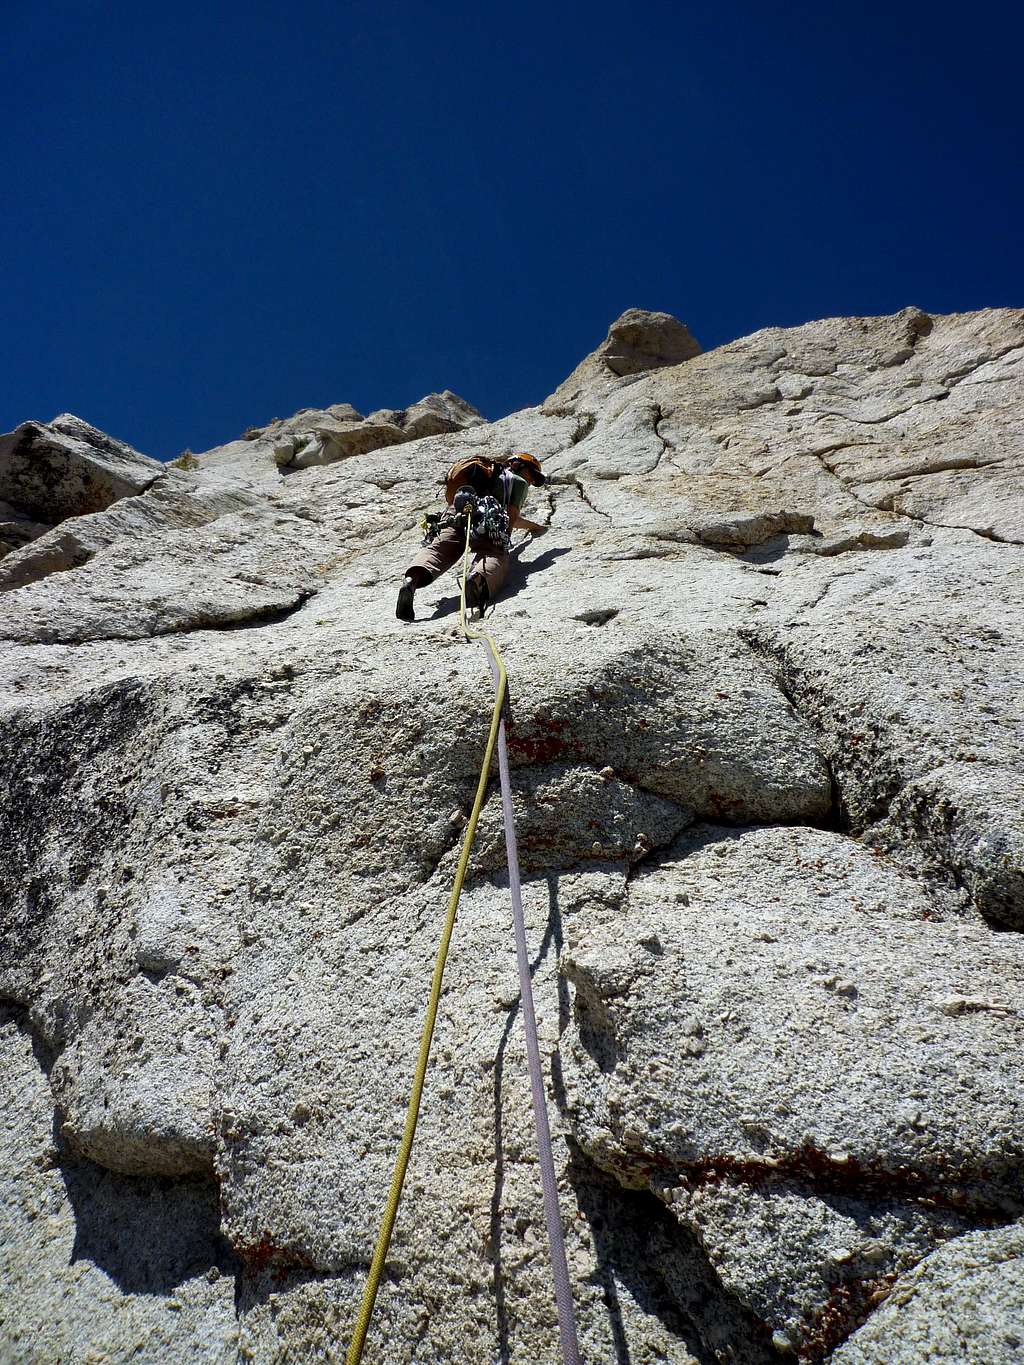 Pitch Two Of Fishstick Buttress